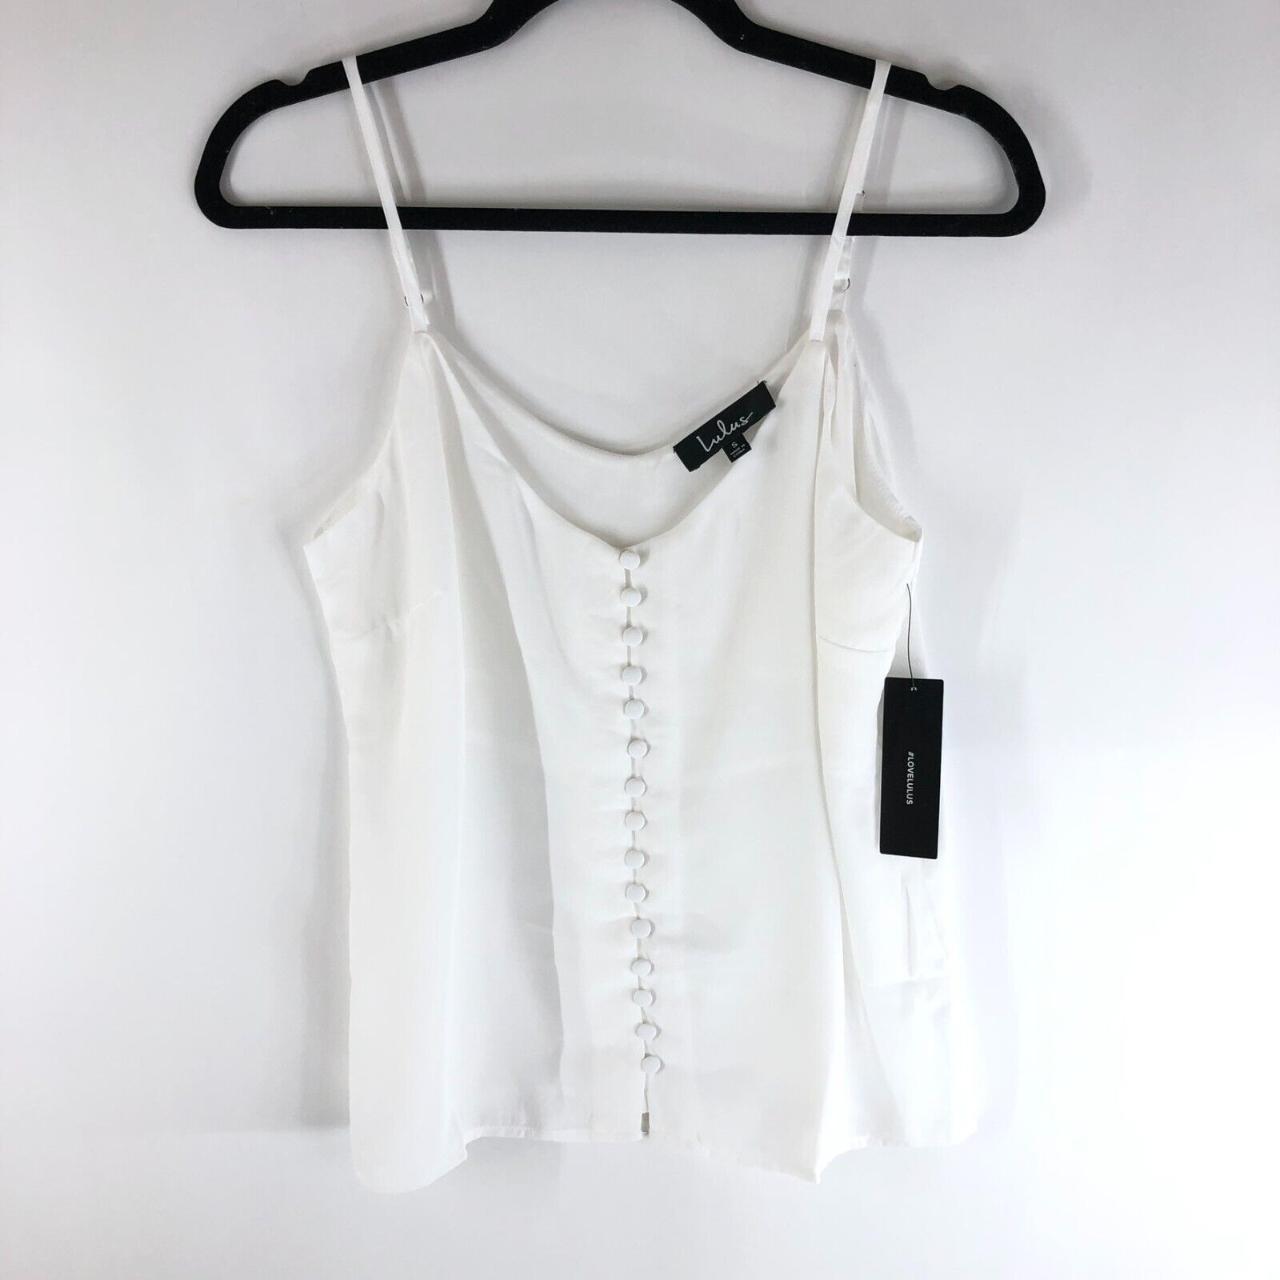 Camis & Camisole Tops for Women - Lulus